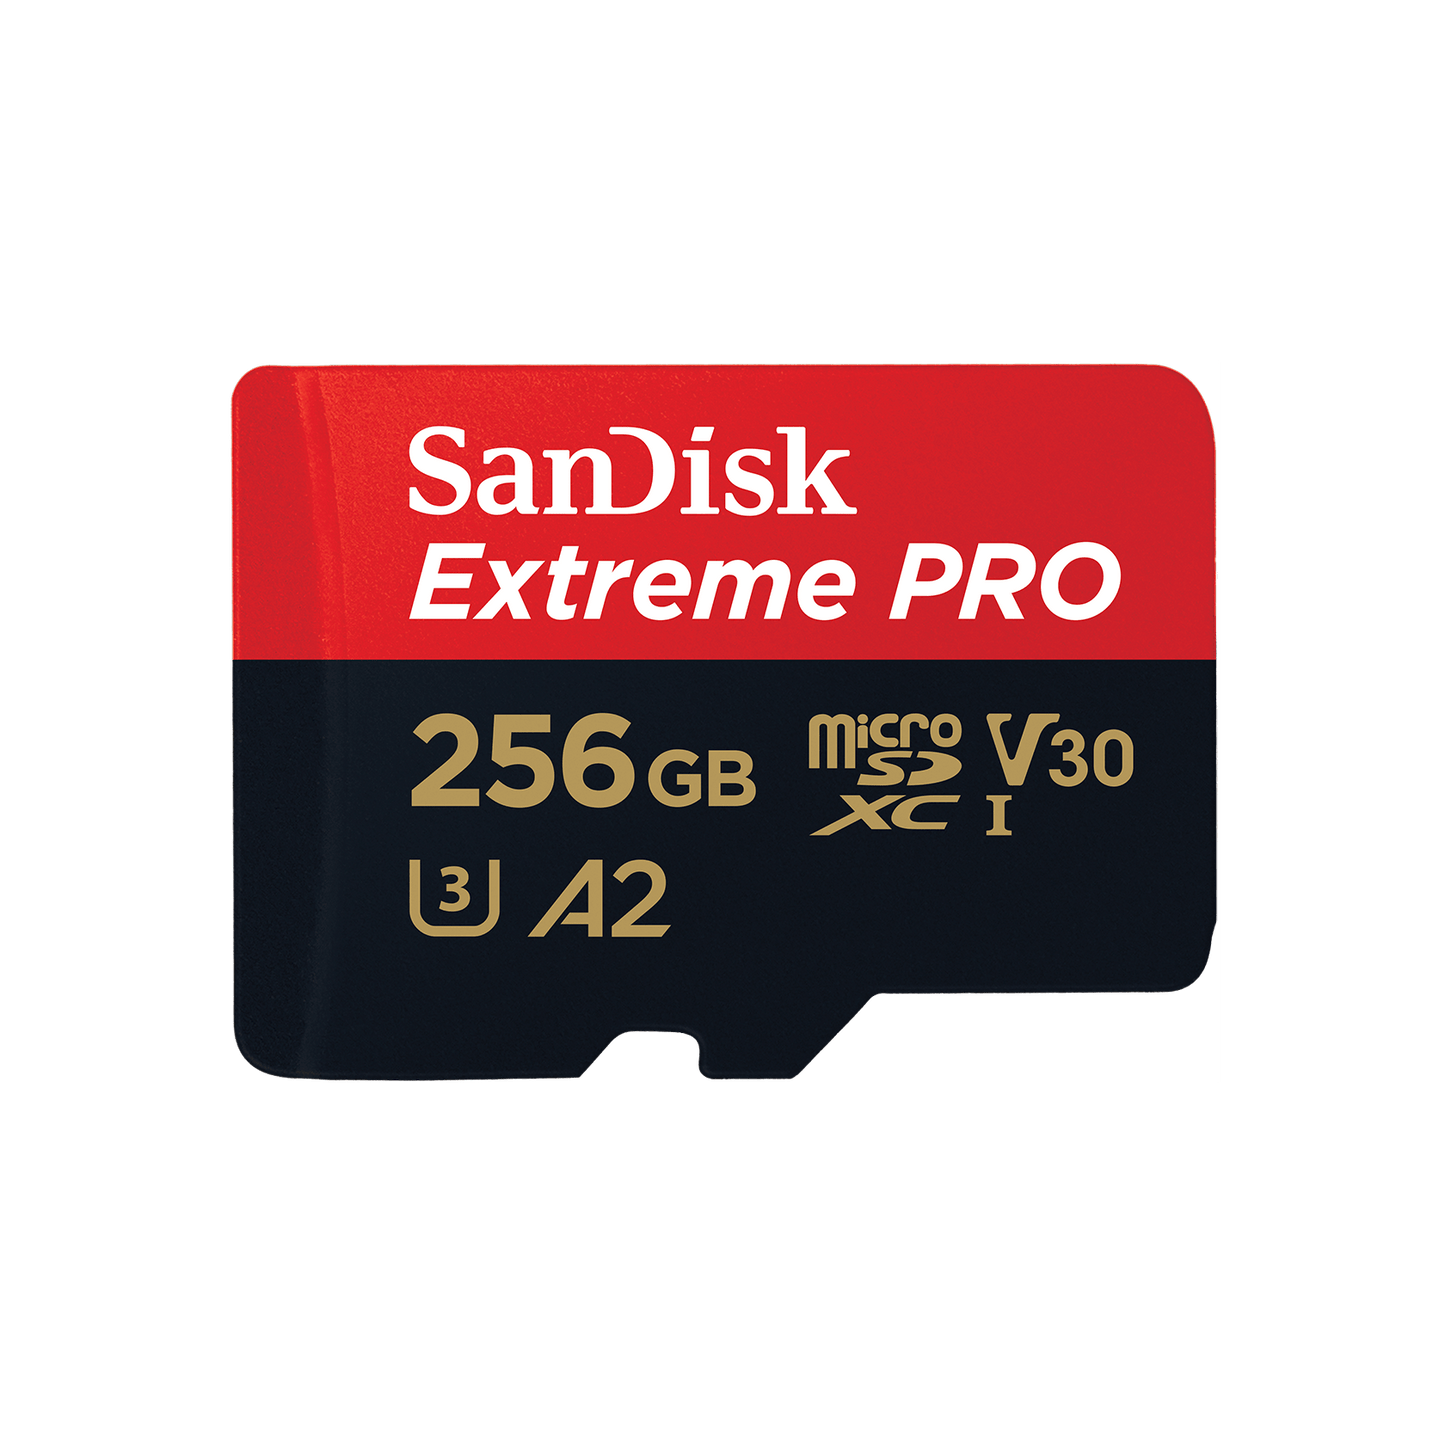 SanDisk Extreme Pro 256 GB microSDXC Memory Card + SD Adapter with A2 App Performance up to 170 MB/s, Class 10, U3, V30